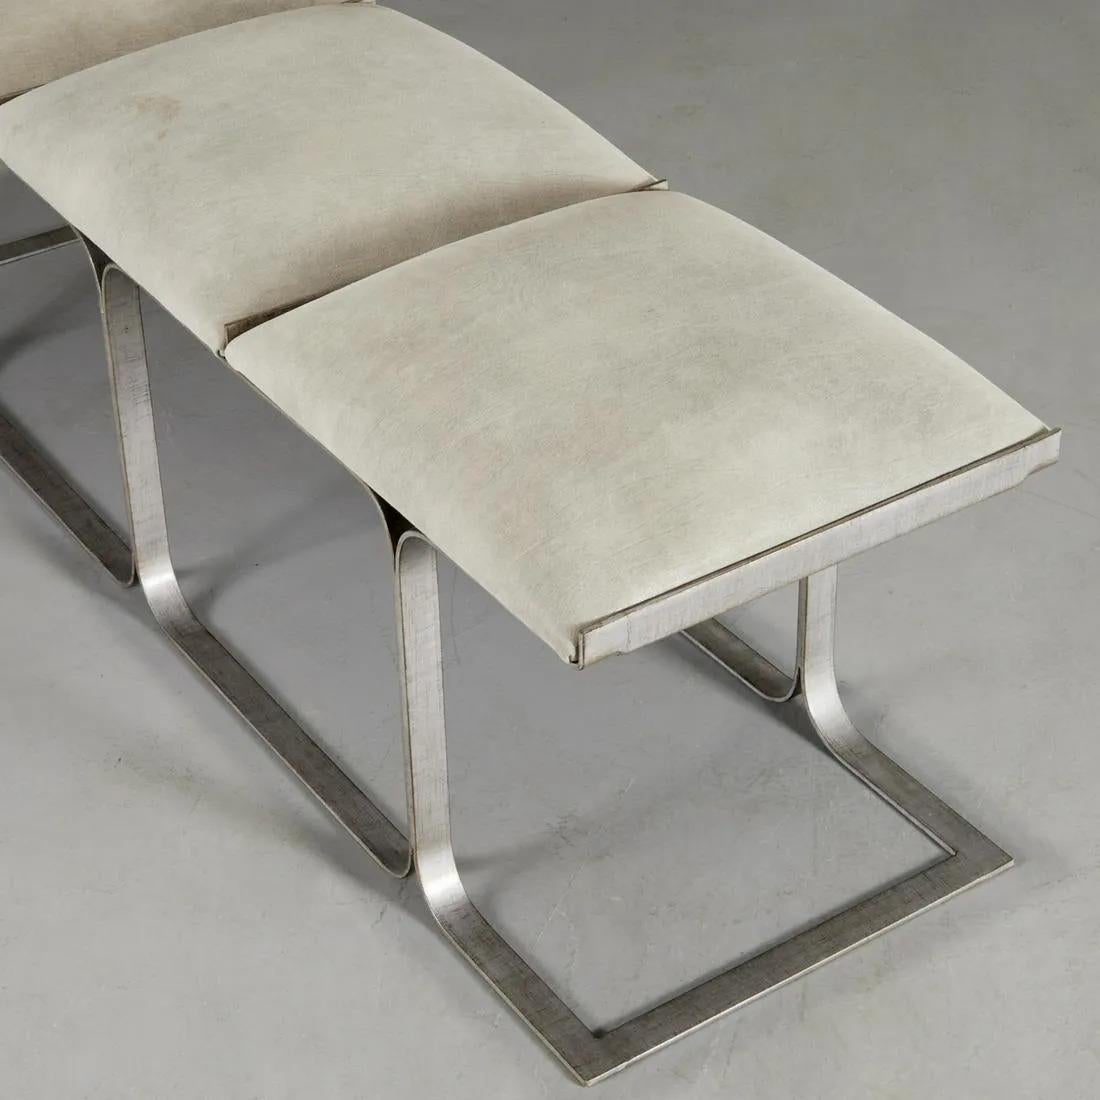 John Behringer 3-seat bench for J.G. Furniture Co. The sculptural frame is nickeled brass with leather covered seats.